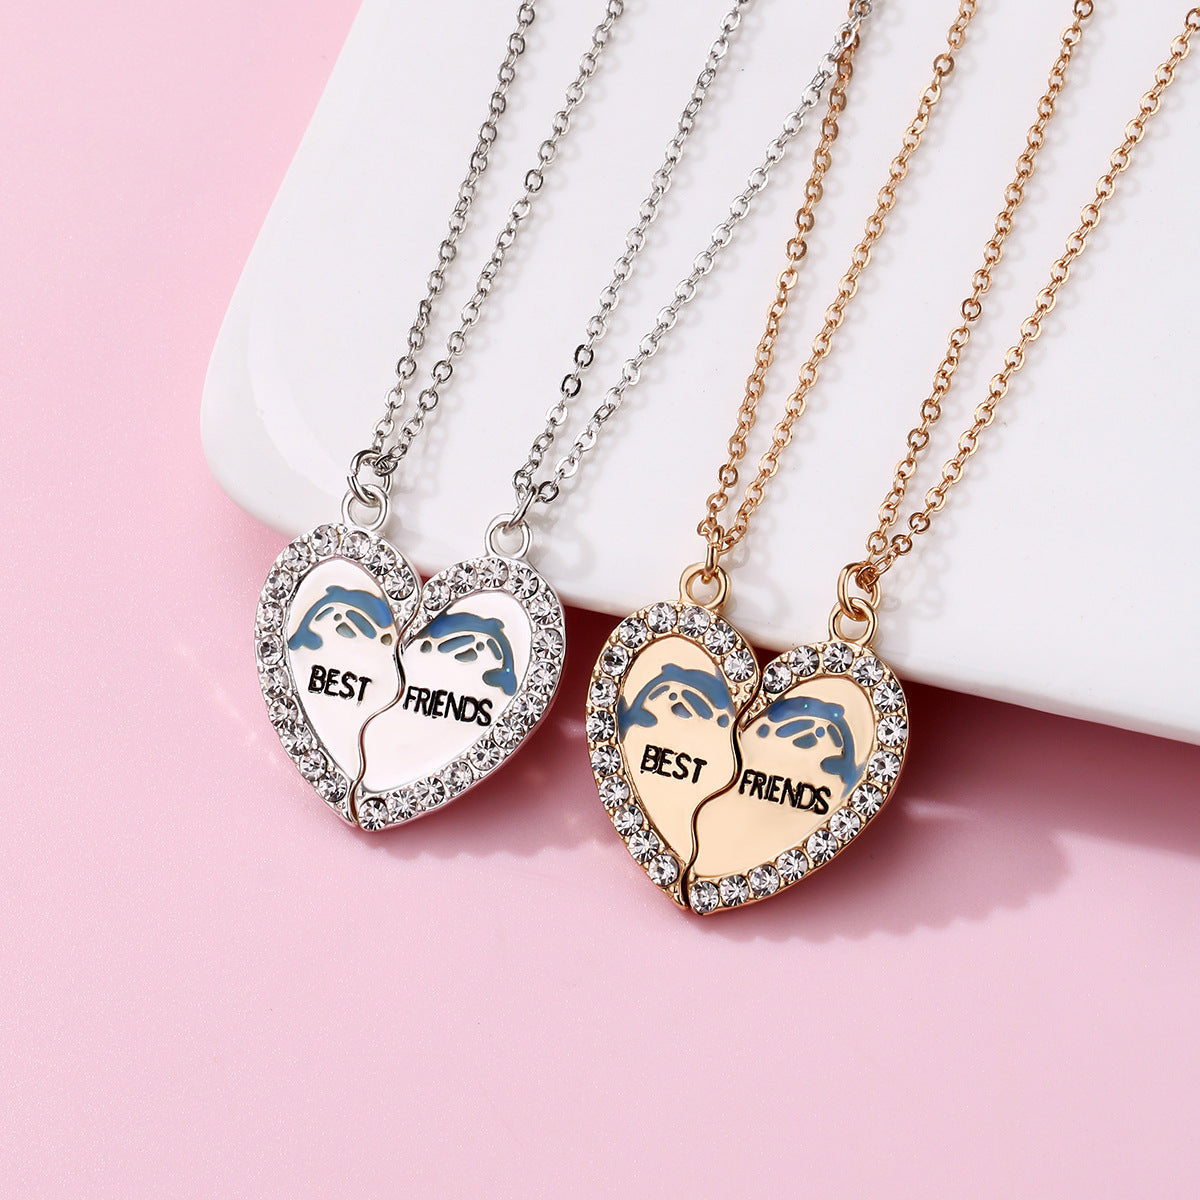 Best Friend Necklaces For 2 Cute| Alibaba.com